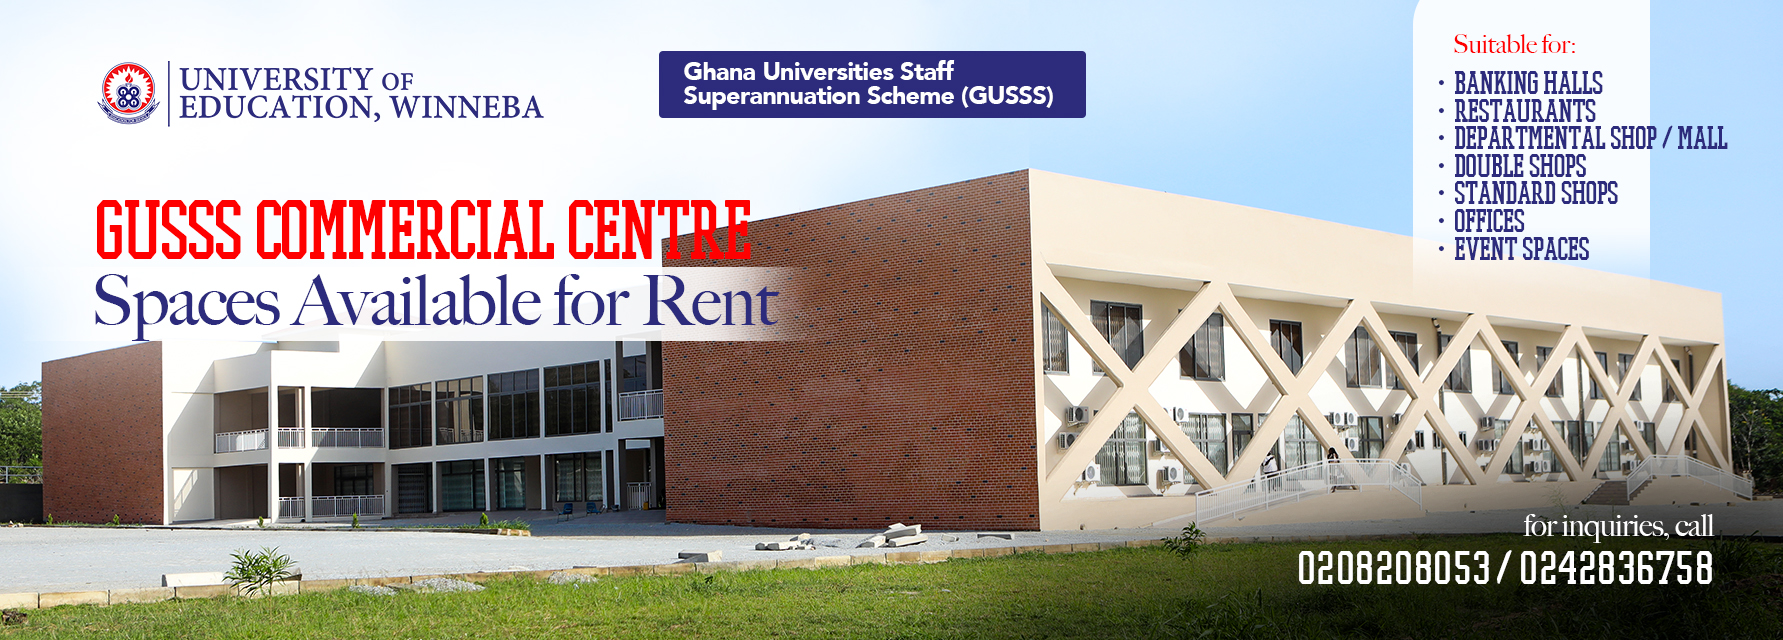 Important Notice: UEW GUSSS Commercial Centre has spaces available for rent